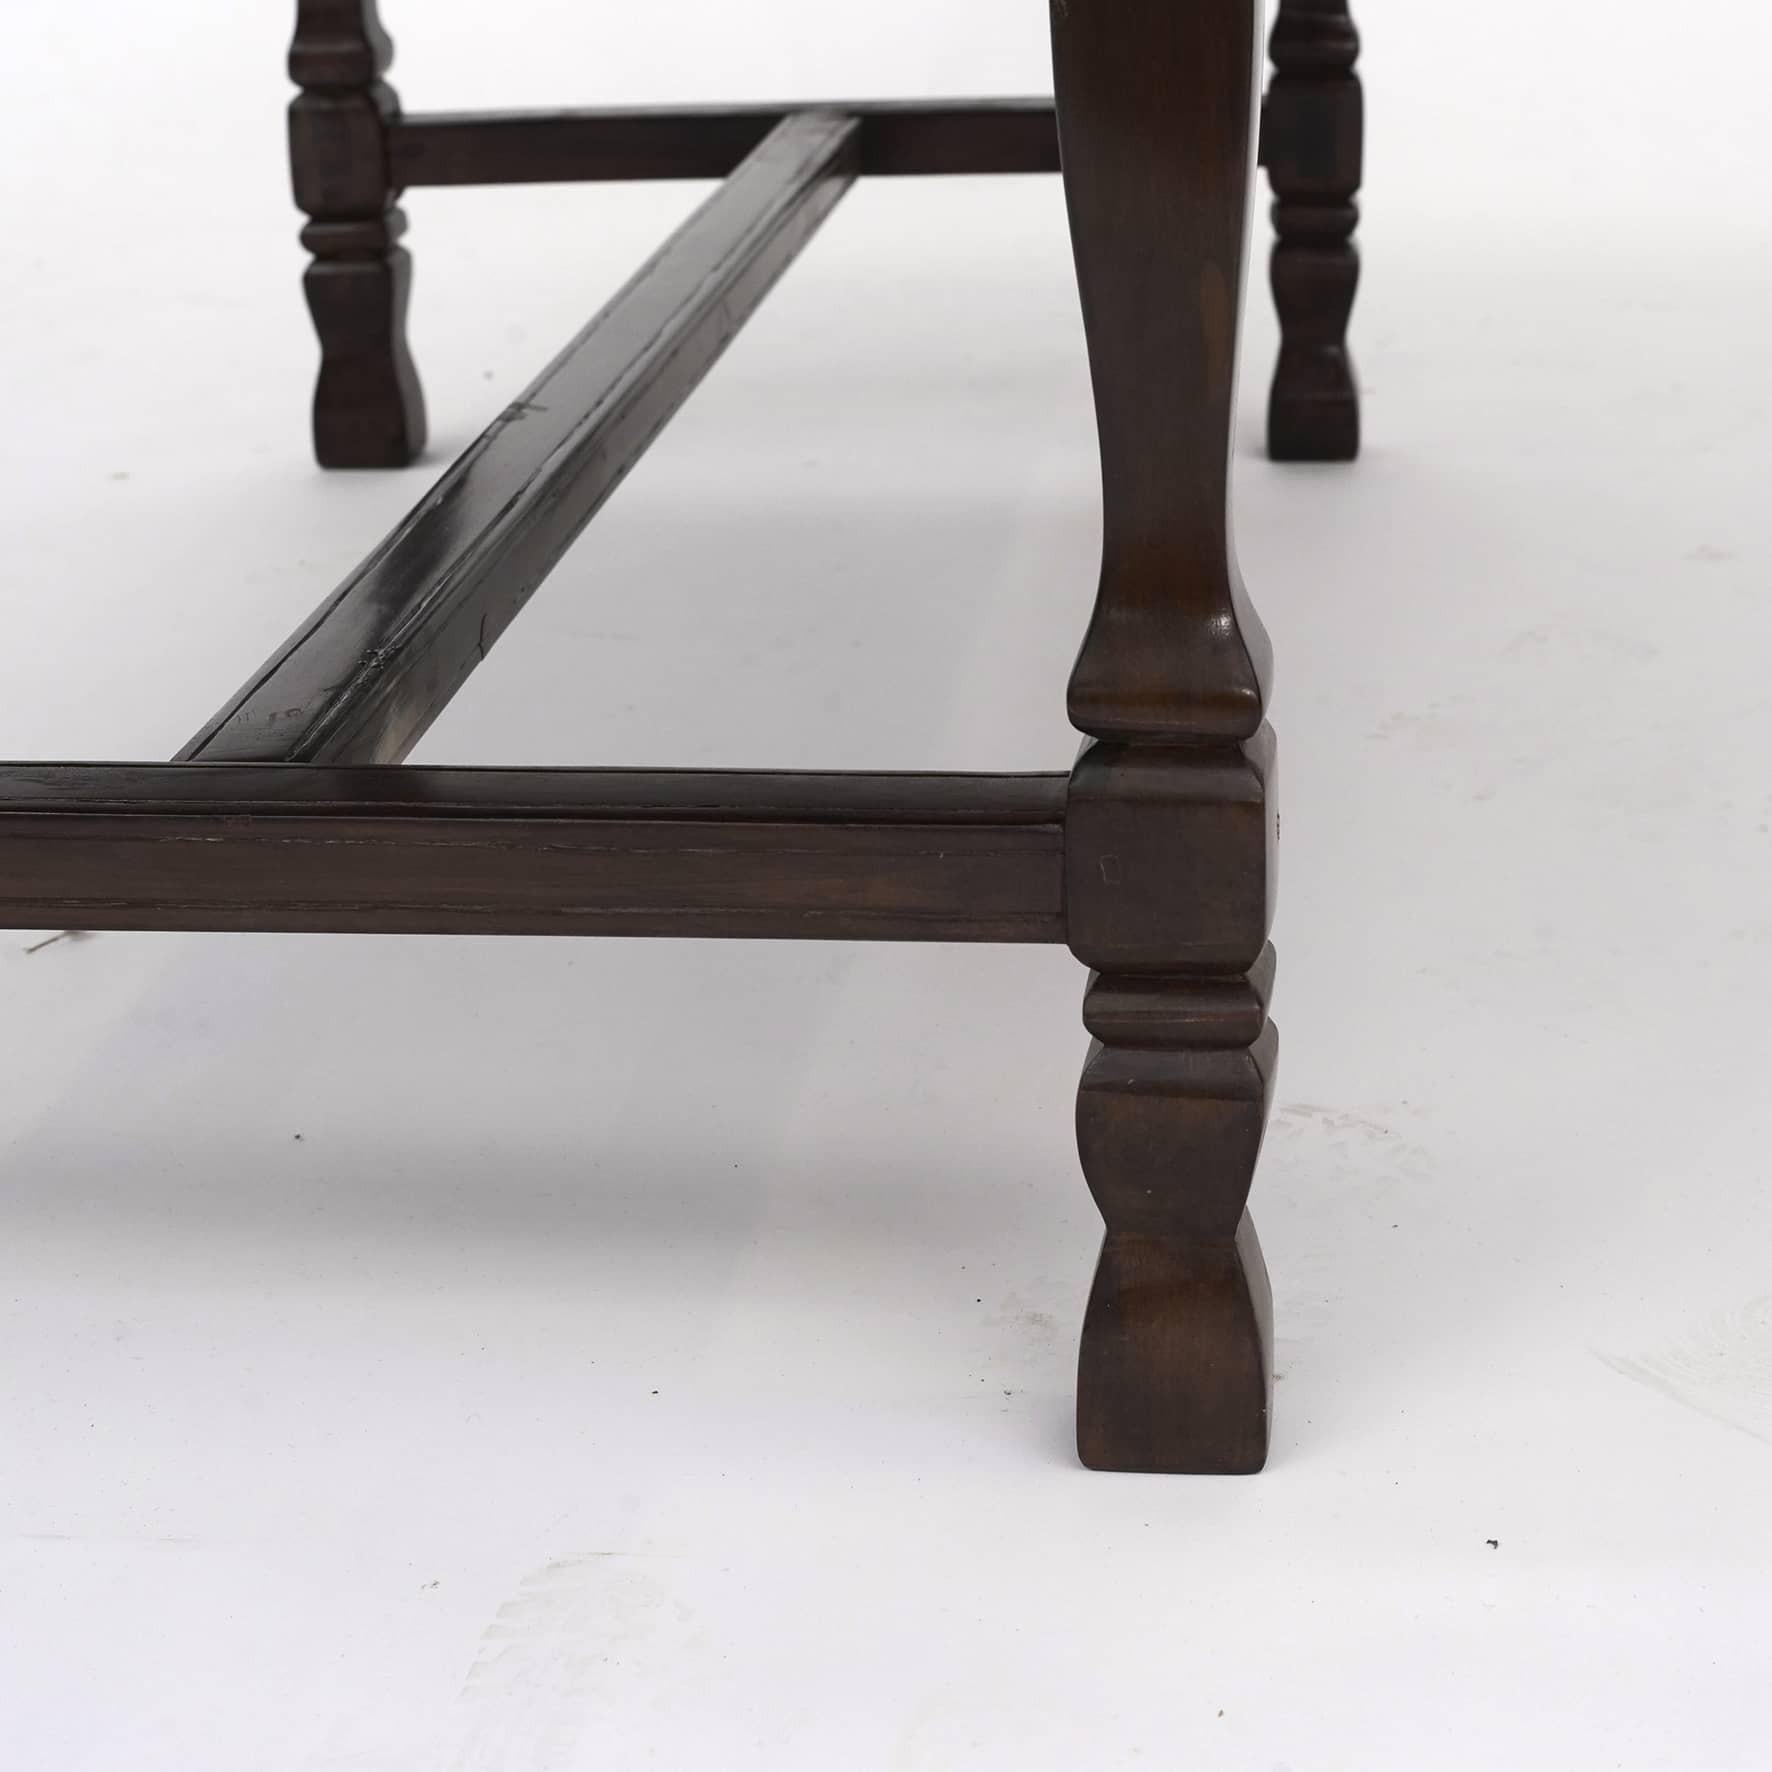 Dinning Table, Spanish Colony 1860 - 1880 In Good Condition For Sale In Kastrup, DK